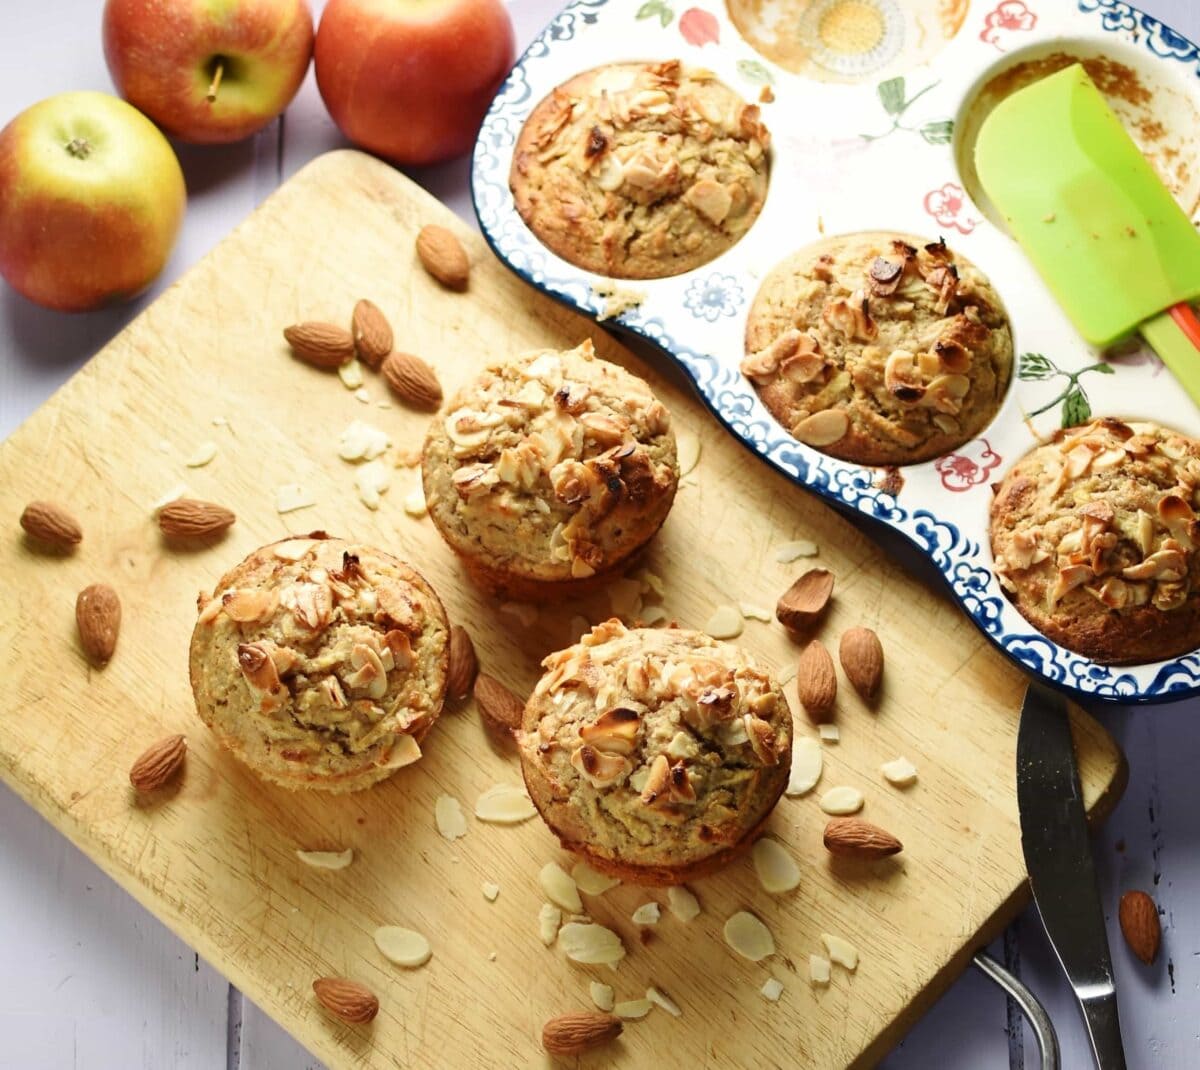 3 muffins with almond flakes on top with almonds on top of wooden board, with 3 more muffins inside ceramic muffin pan and apples in background.